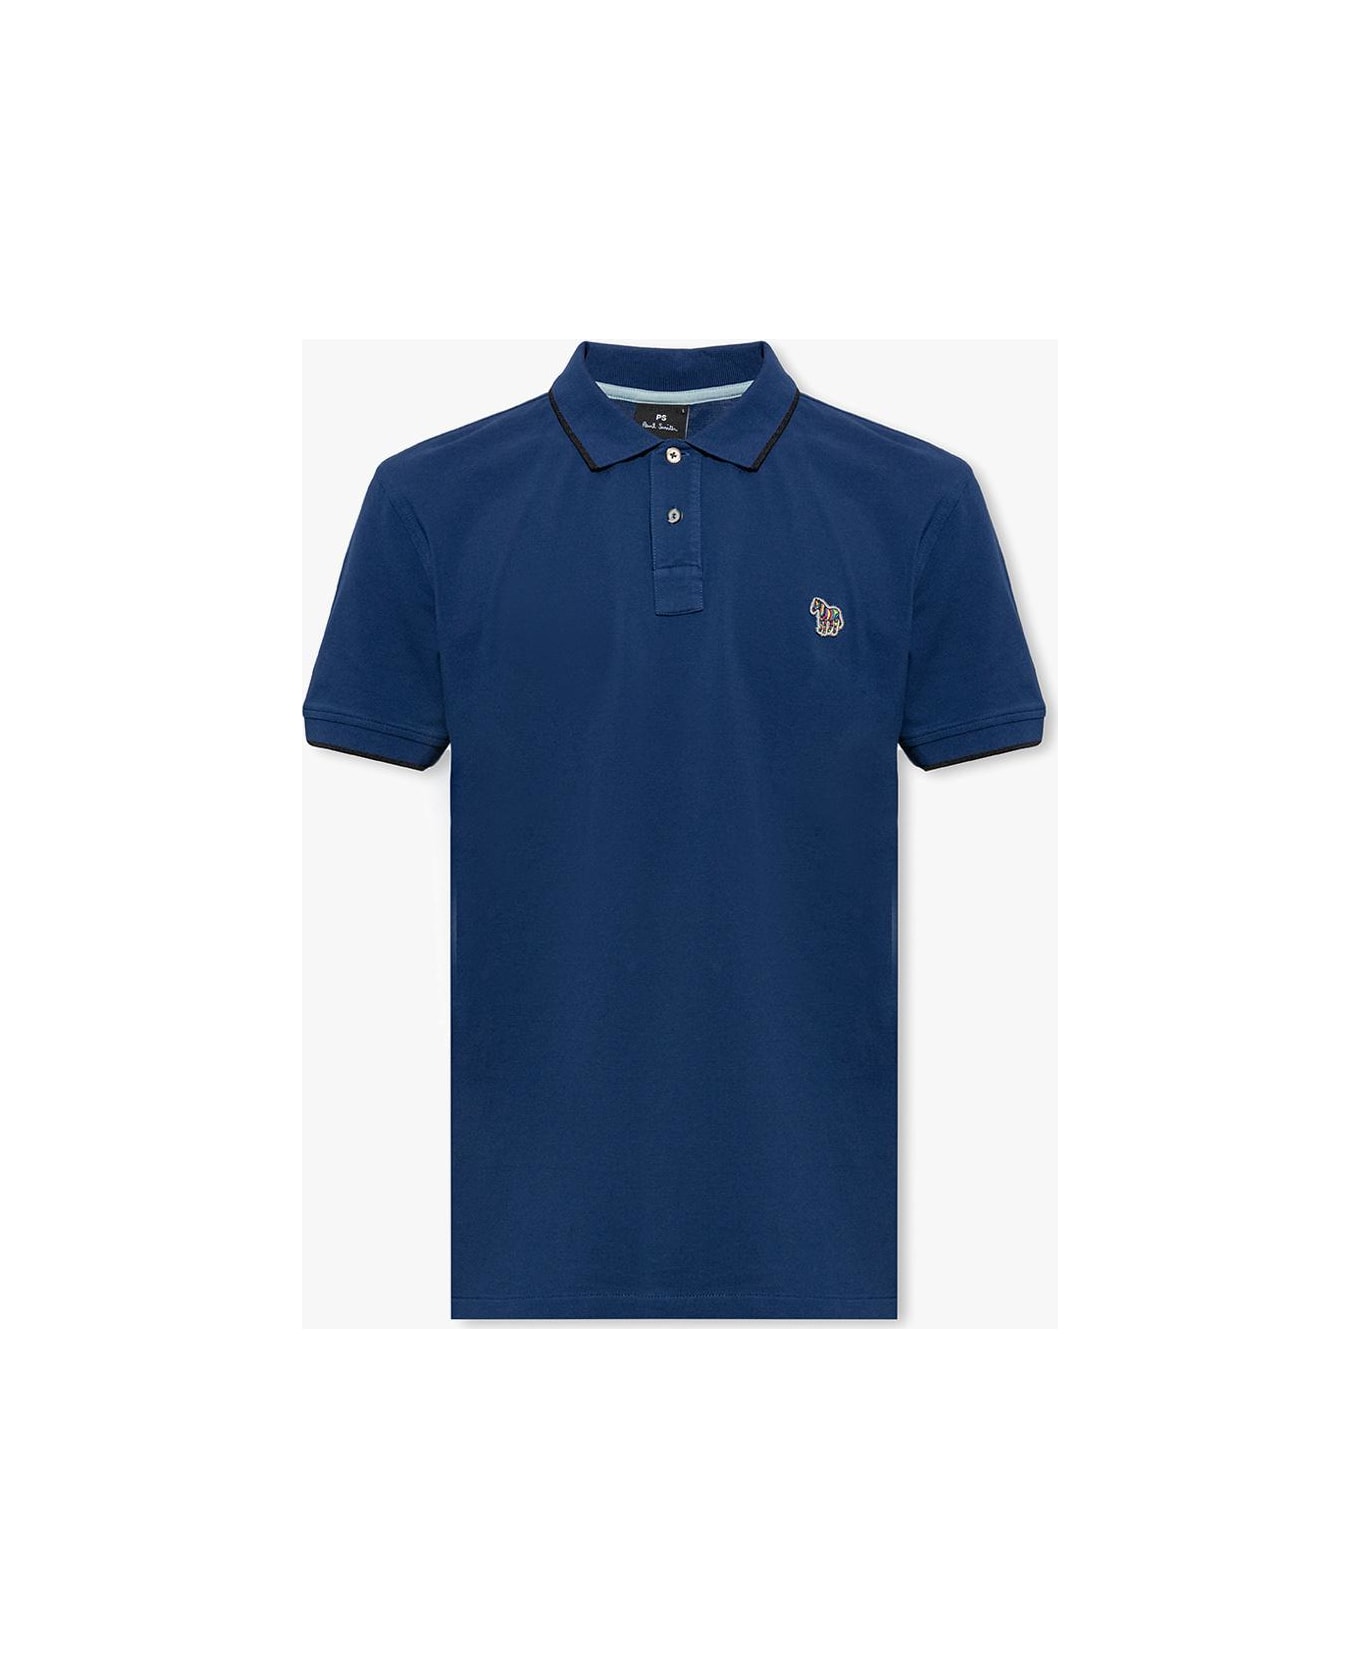 PS by Paul Smith Polo Shirt With Zebra Motif - NAVY